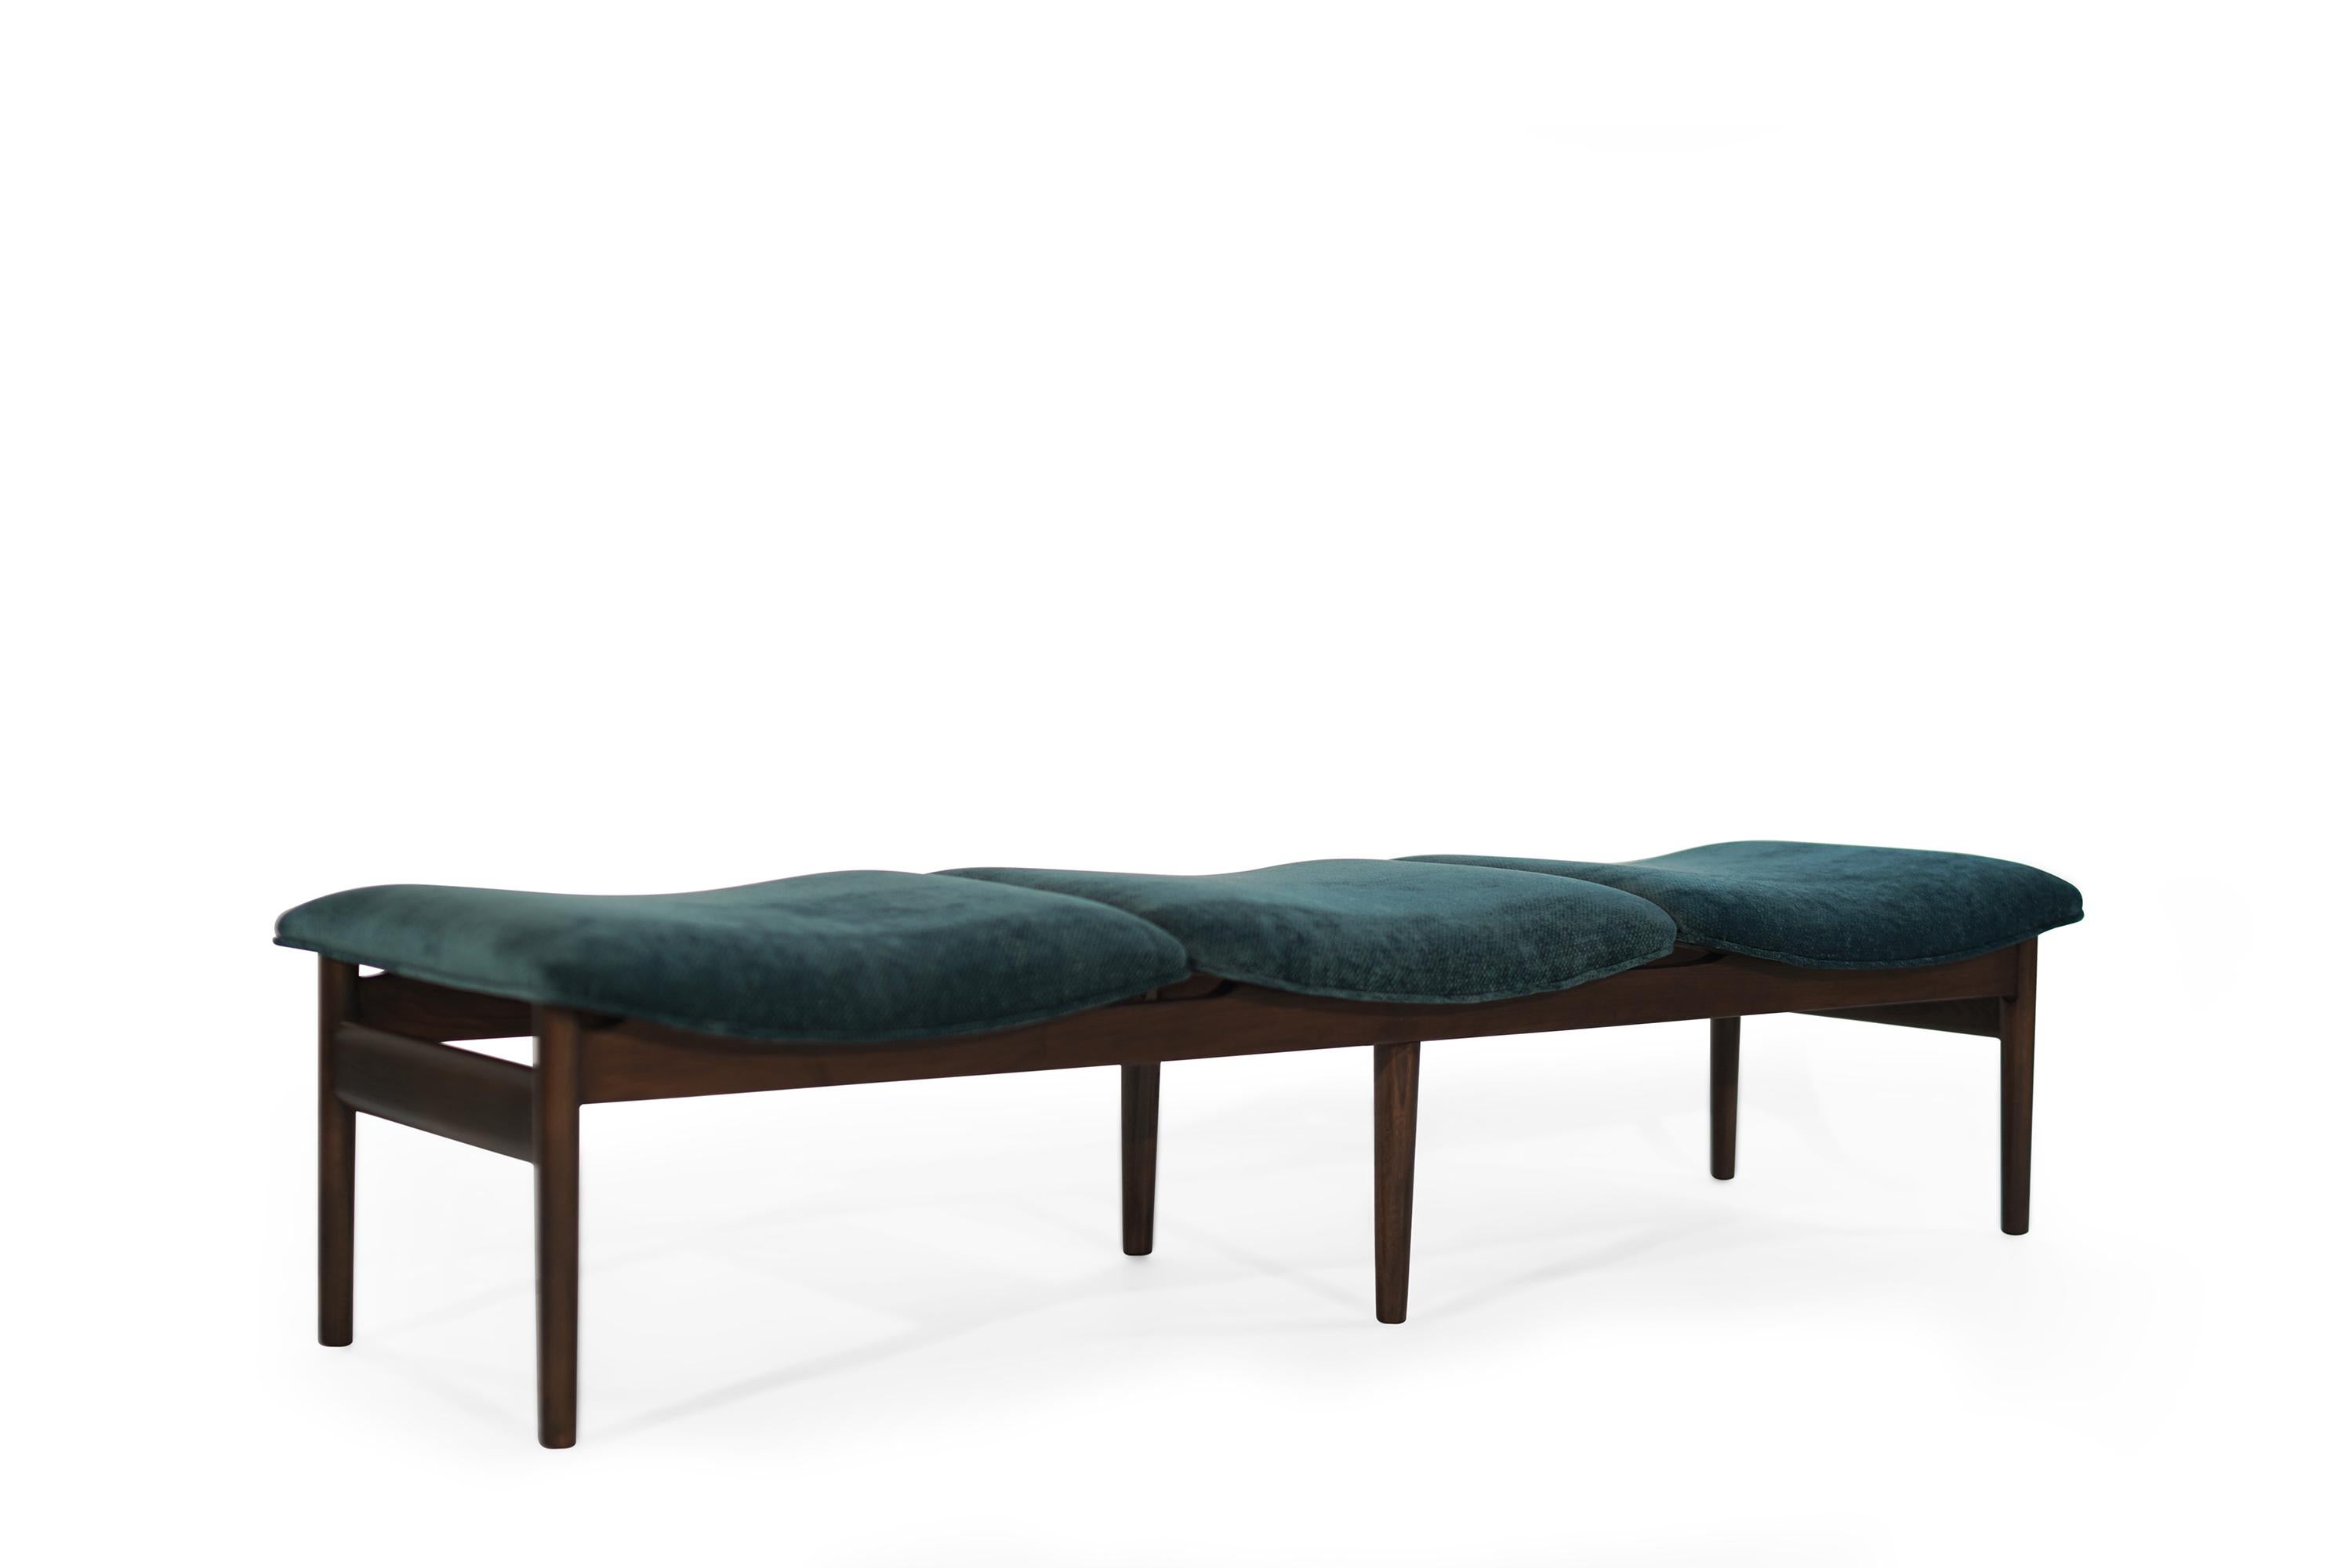 American Lawrence Peabody Bench in Teal Twill, 1950s